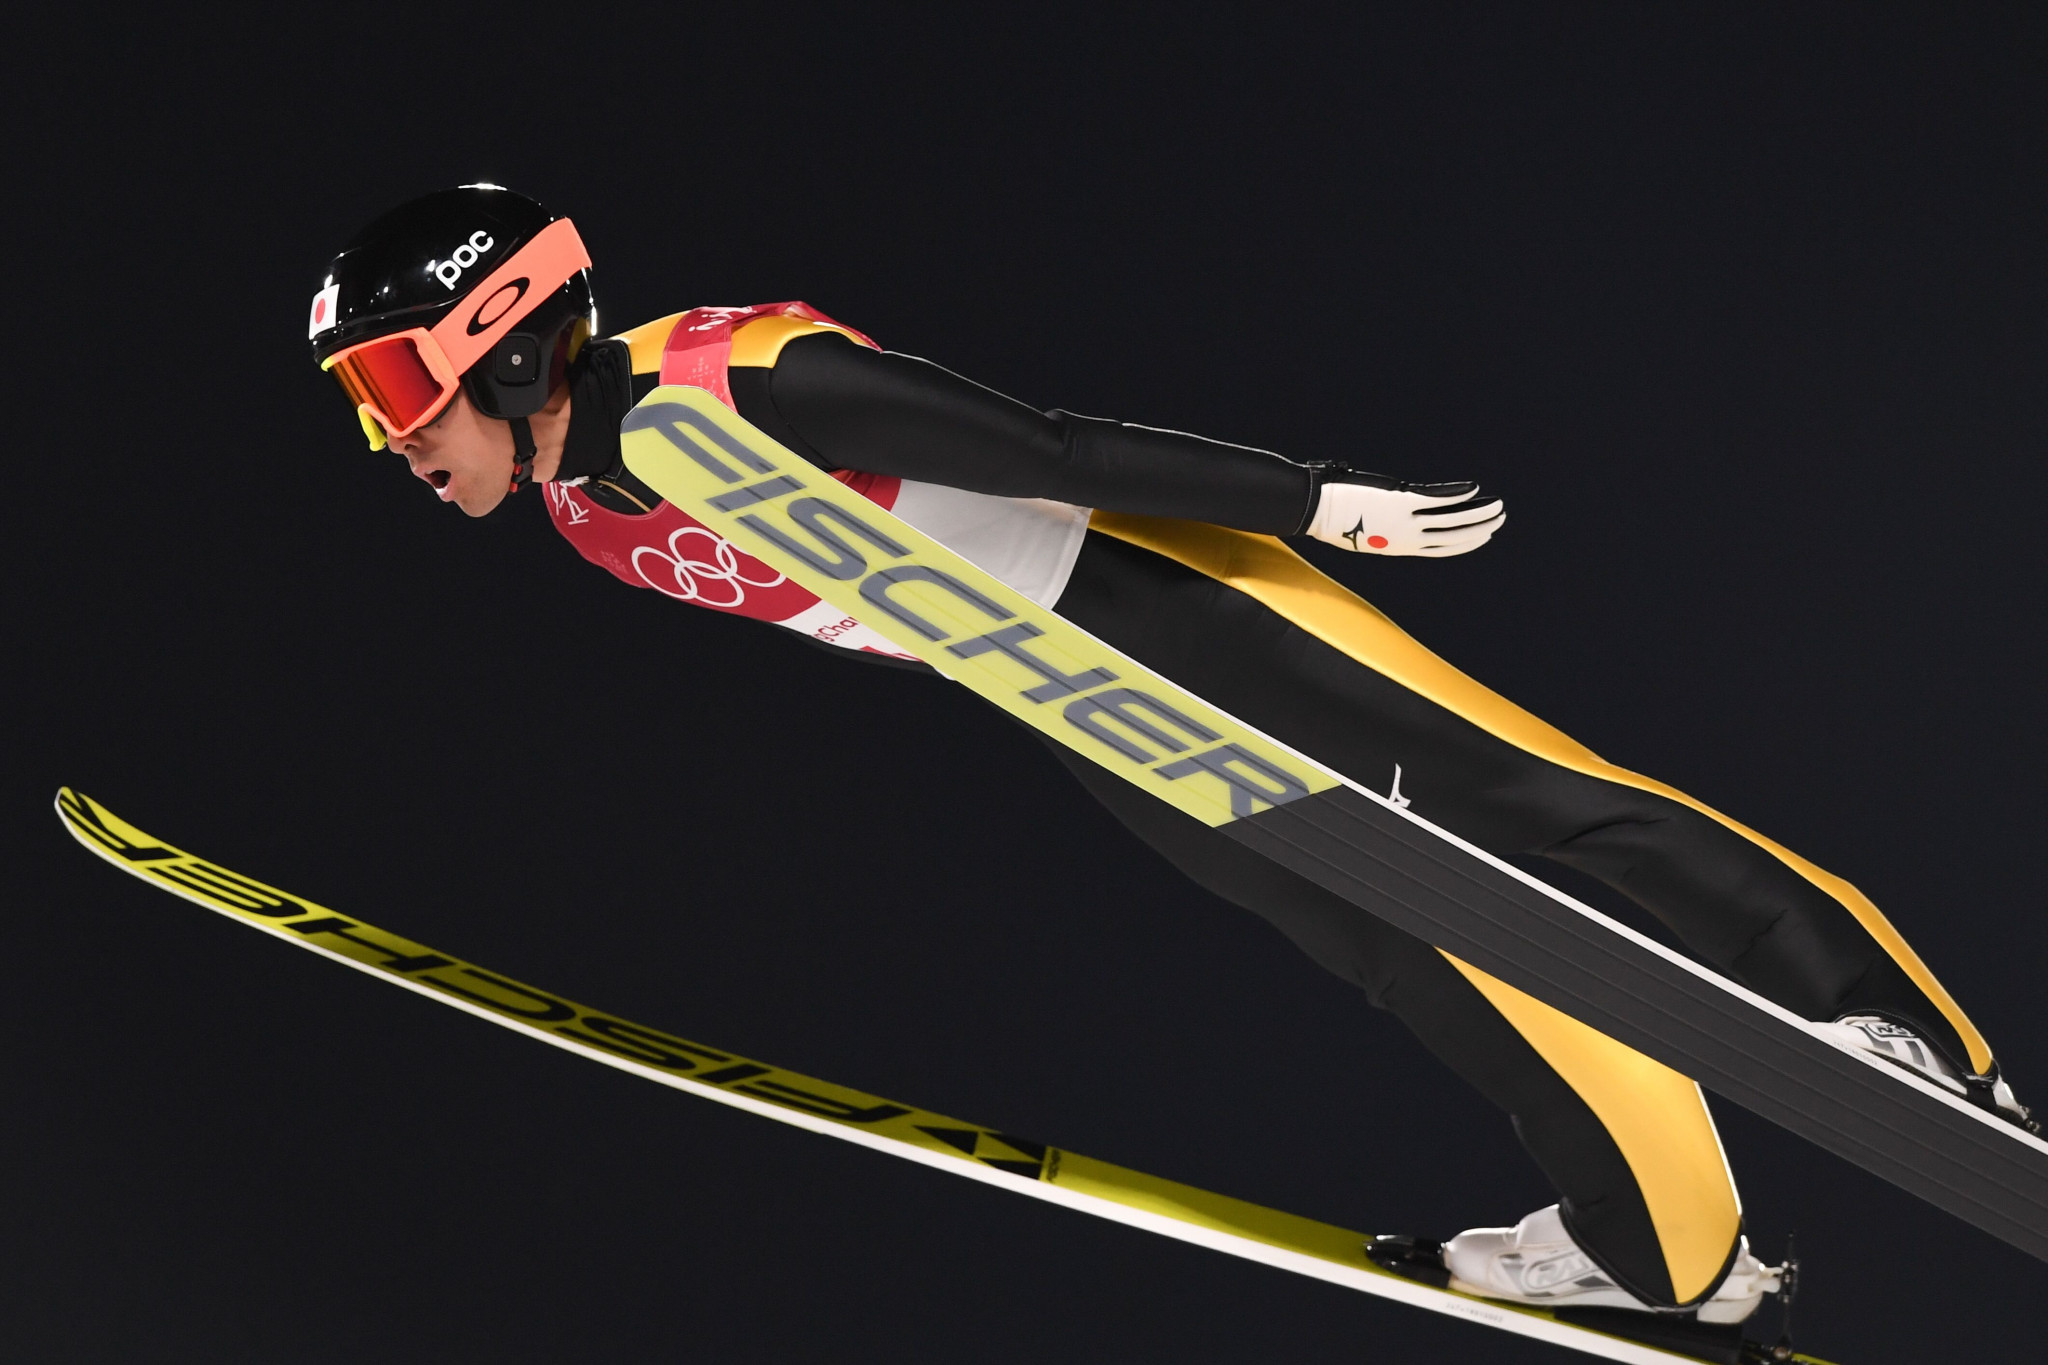 Japan's Akito Watabe won the ski jumping segment, but finished fifth overall ©Getty Images